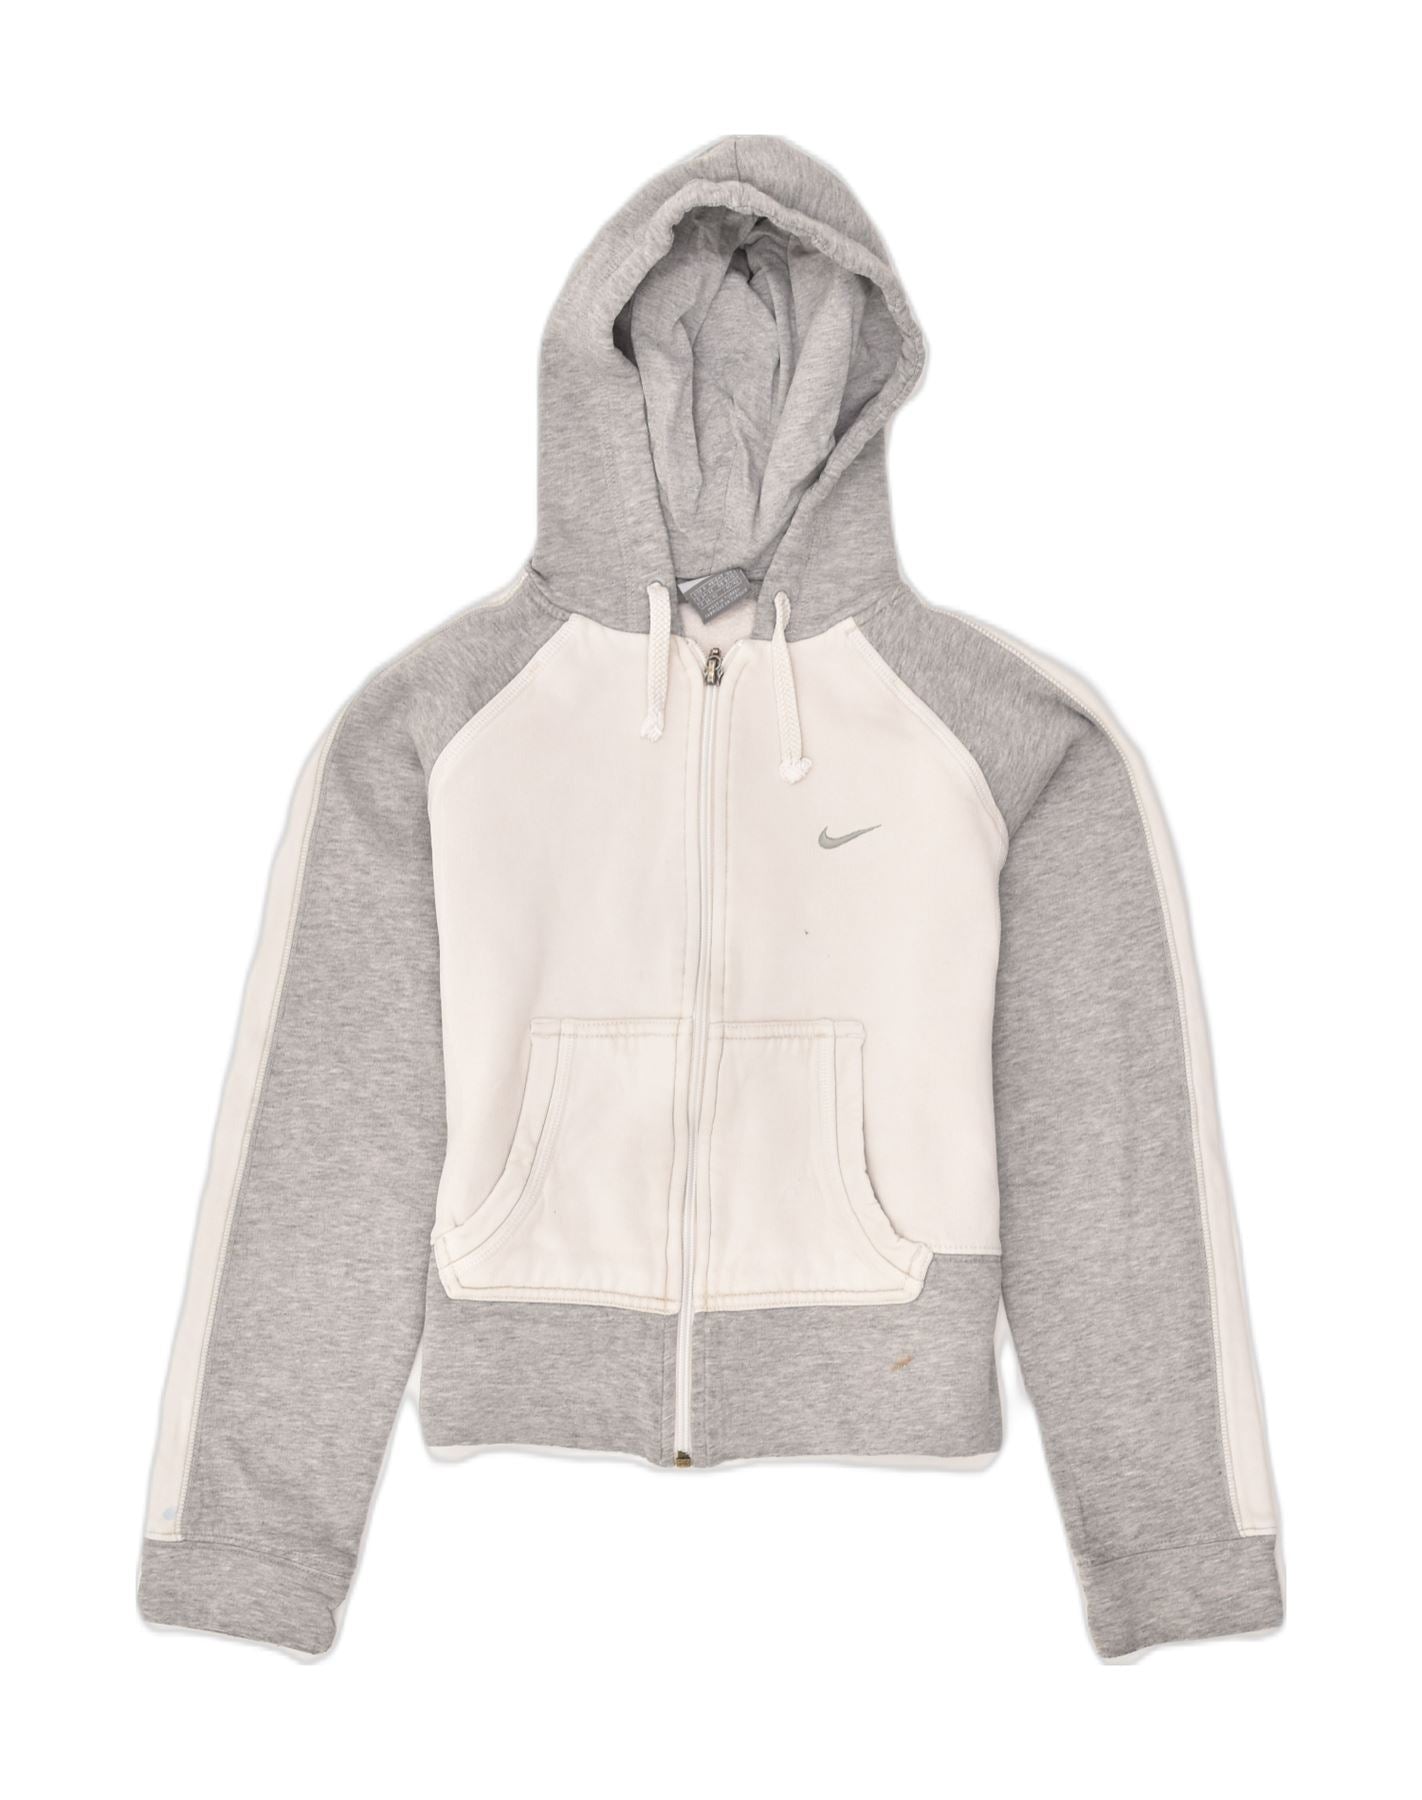 NIKE Womens Graphic Zip Hoodie Sweater UK 8/10 Small Grey Cotton, Vintage  & Second-Hand Clothing Online